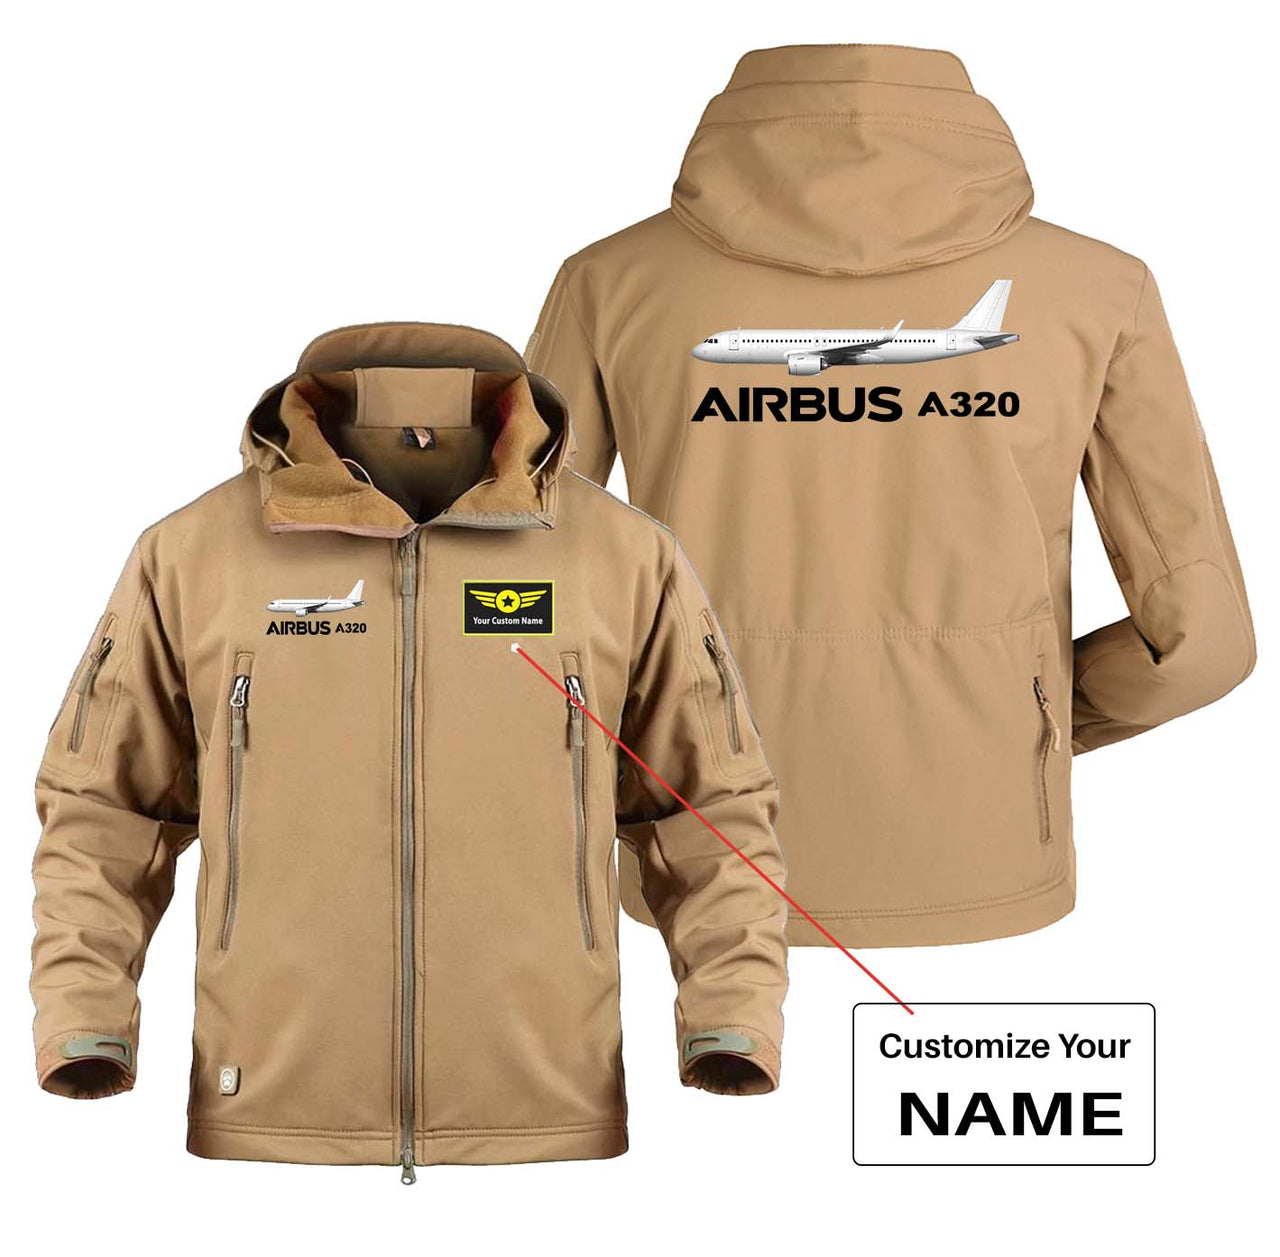 The Airbus A320 Designed Military Jackets (Customizable)